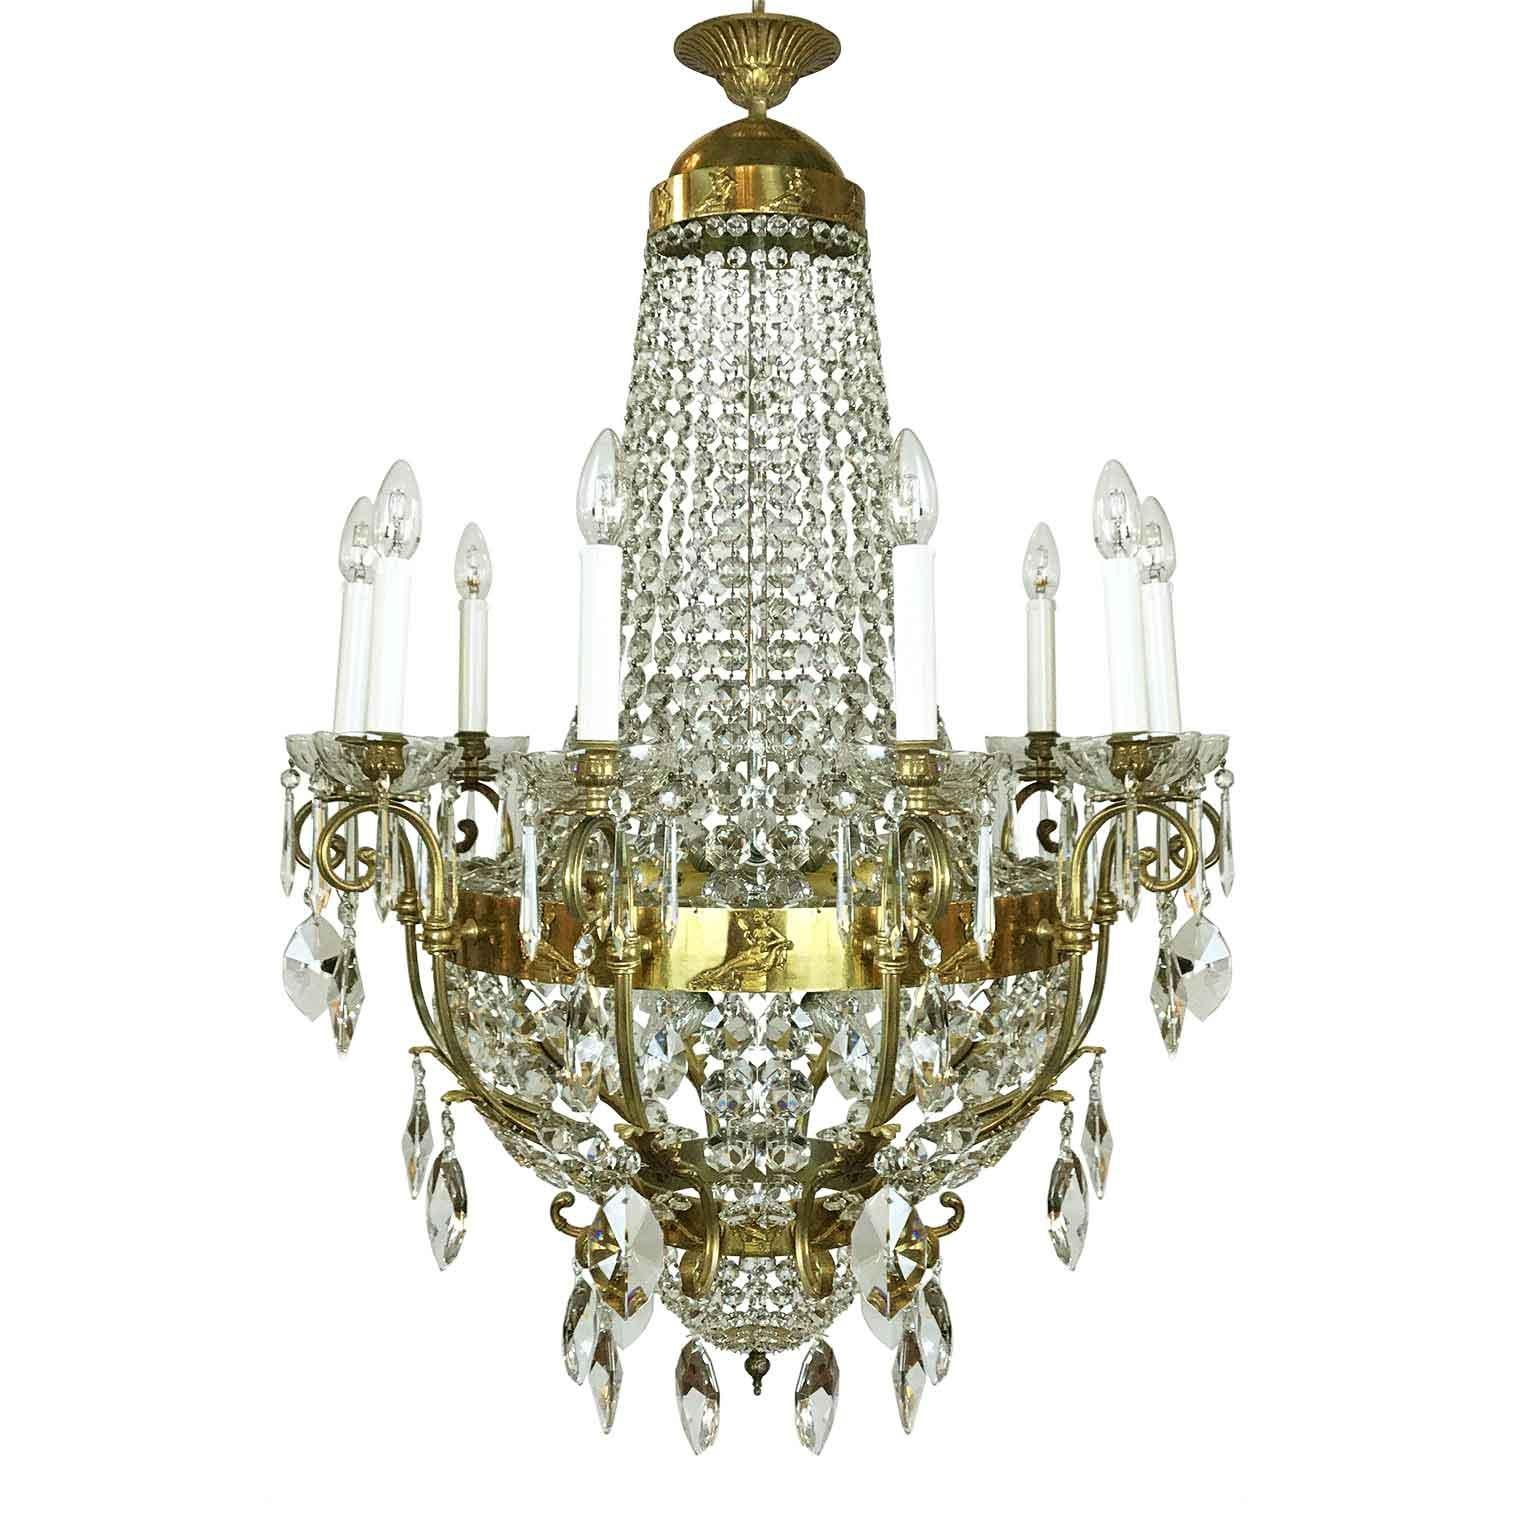 20th Century Italian Neoclassical Style Crystal Chandelier Roman Female Figures For Sale 9